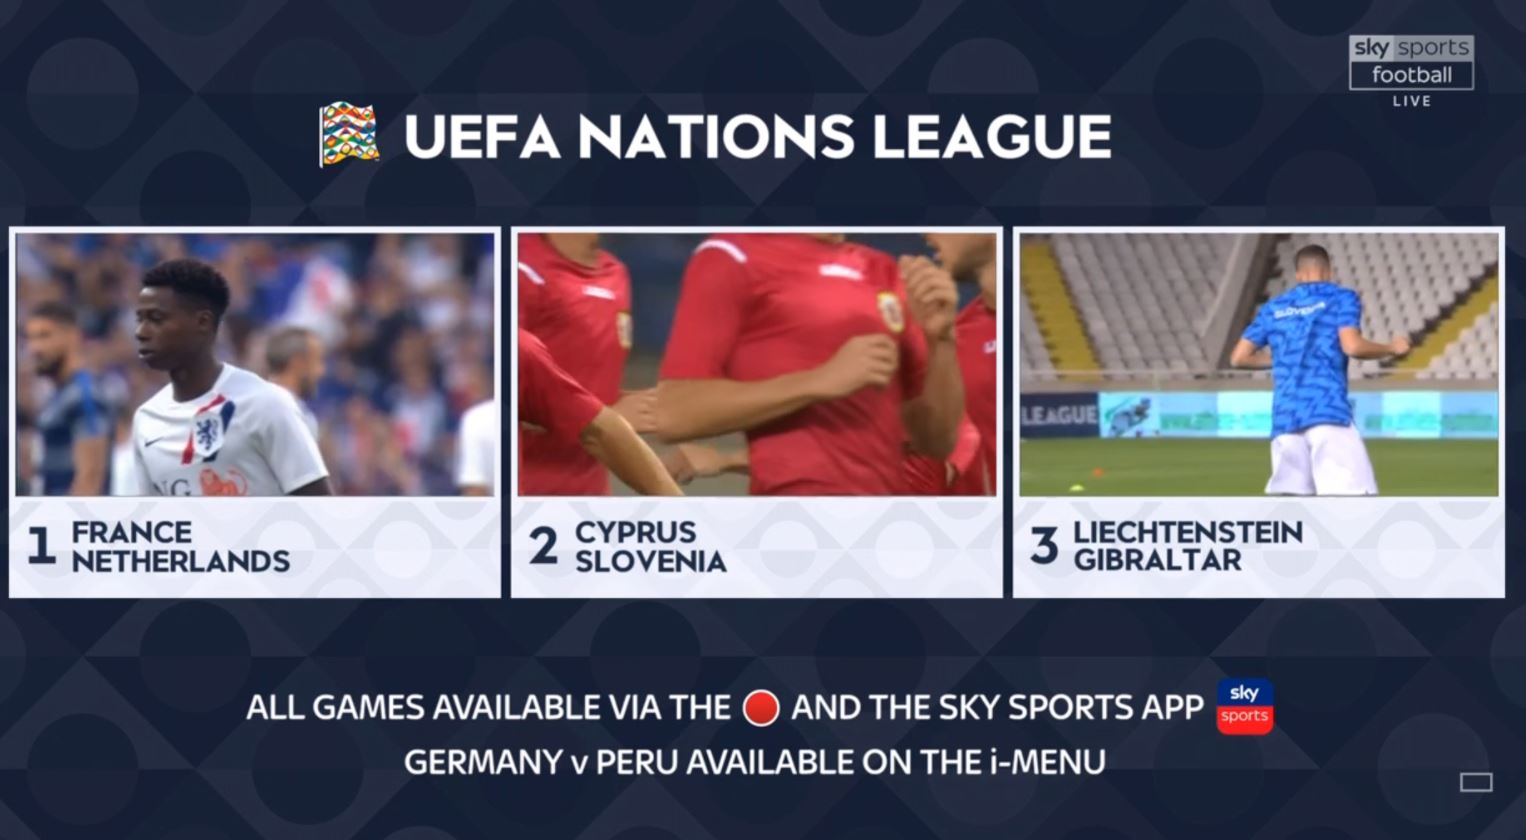 X 上的Sky Sports Football：「⚽️ UEFA Nations League Live ⚽️ Watch France v Netherlands now on Sky Sports Football, plus two games on the red button